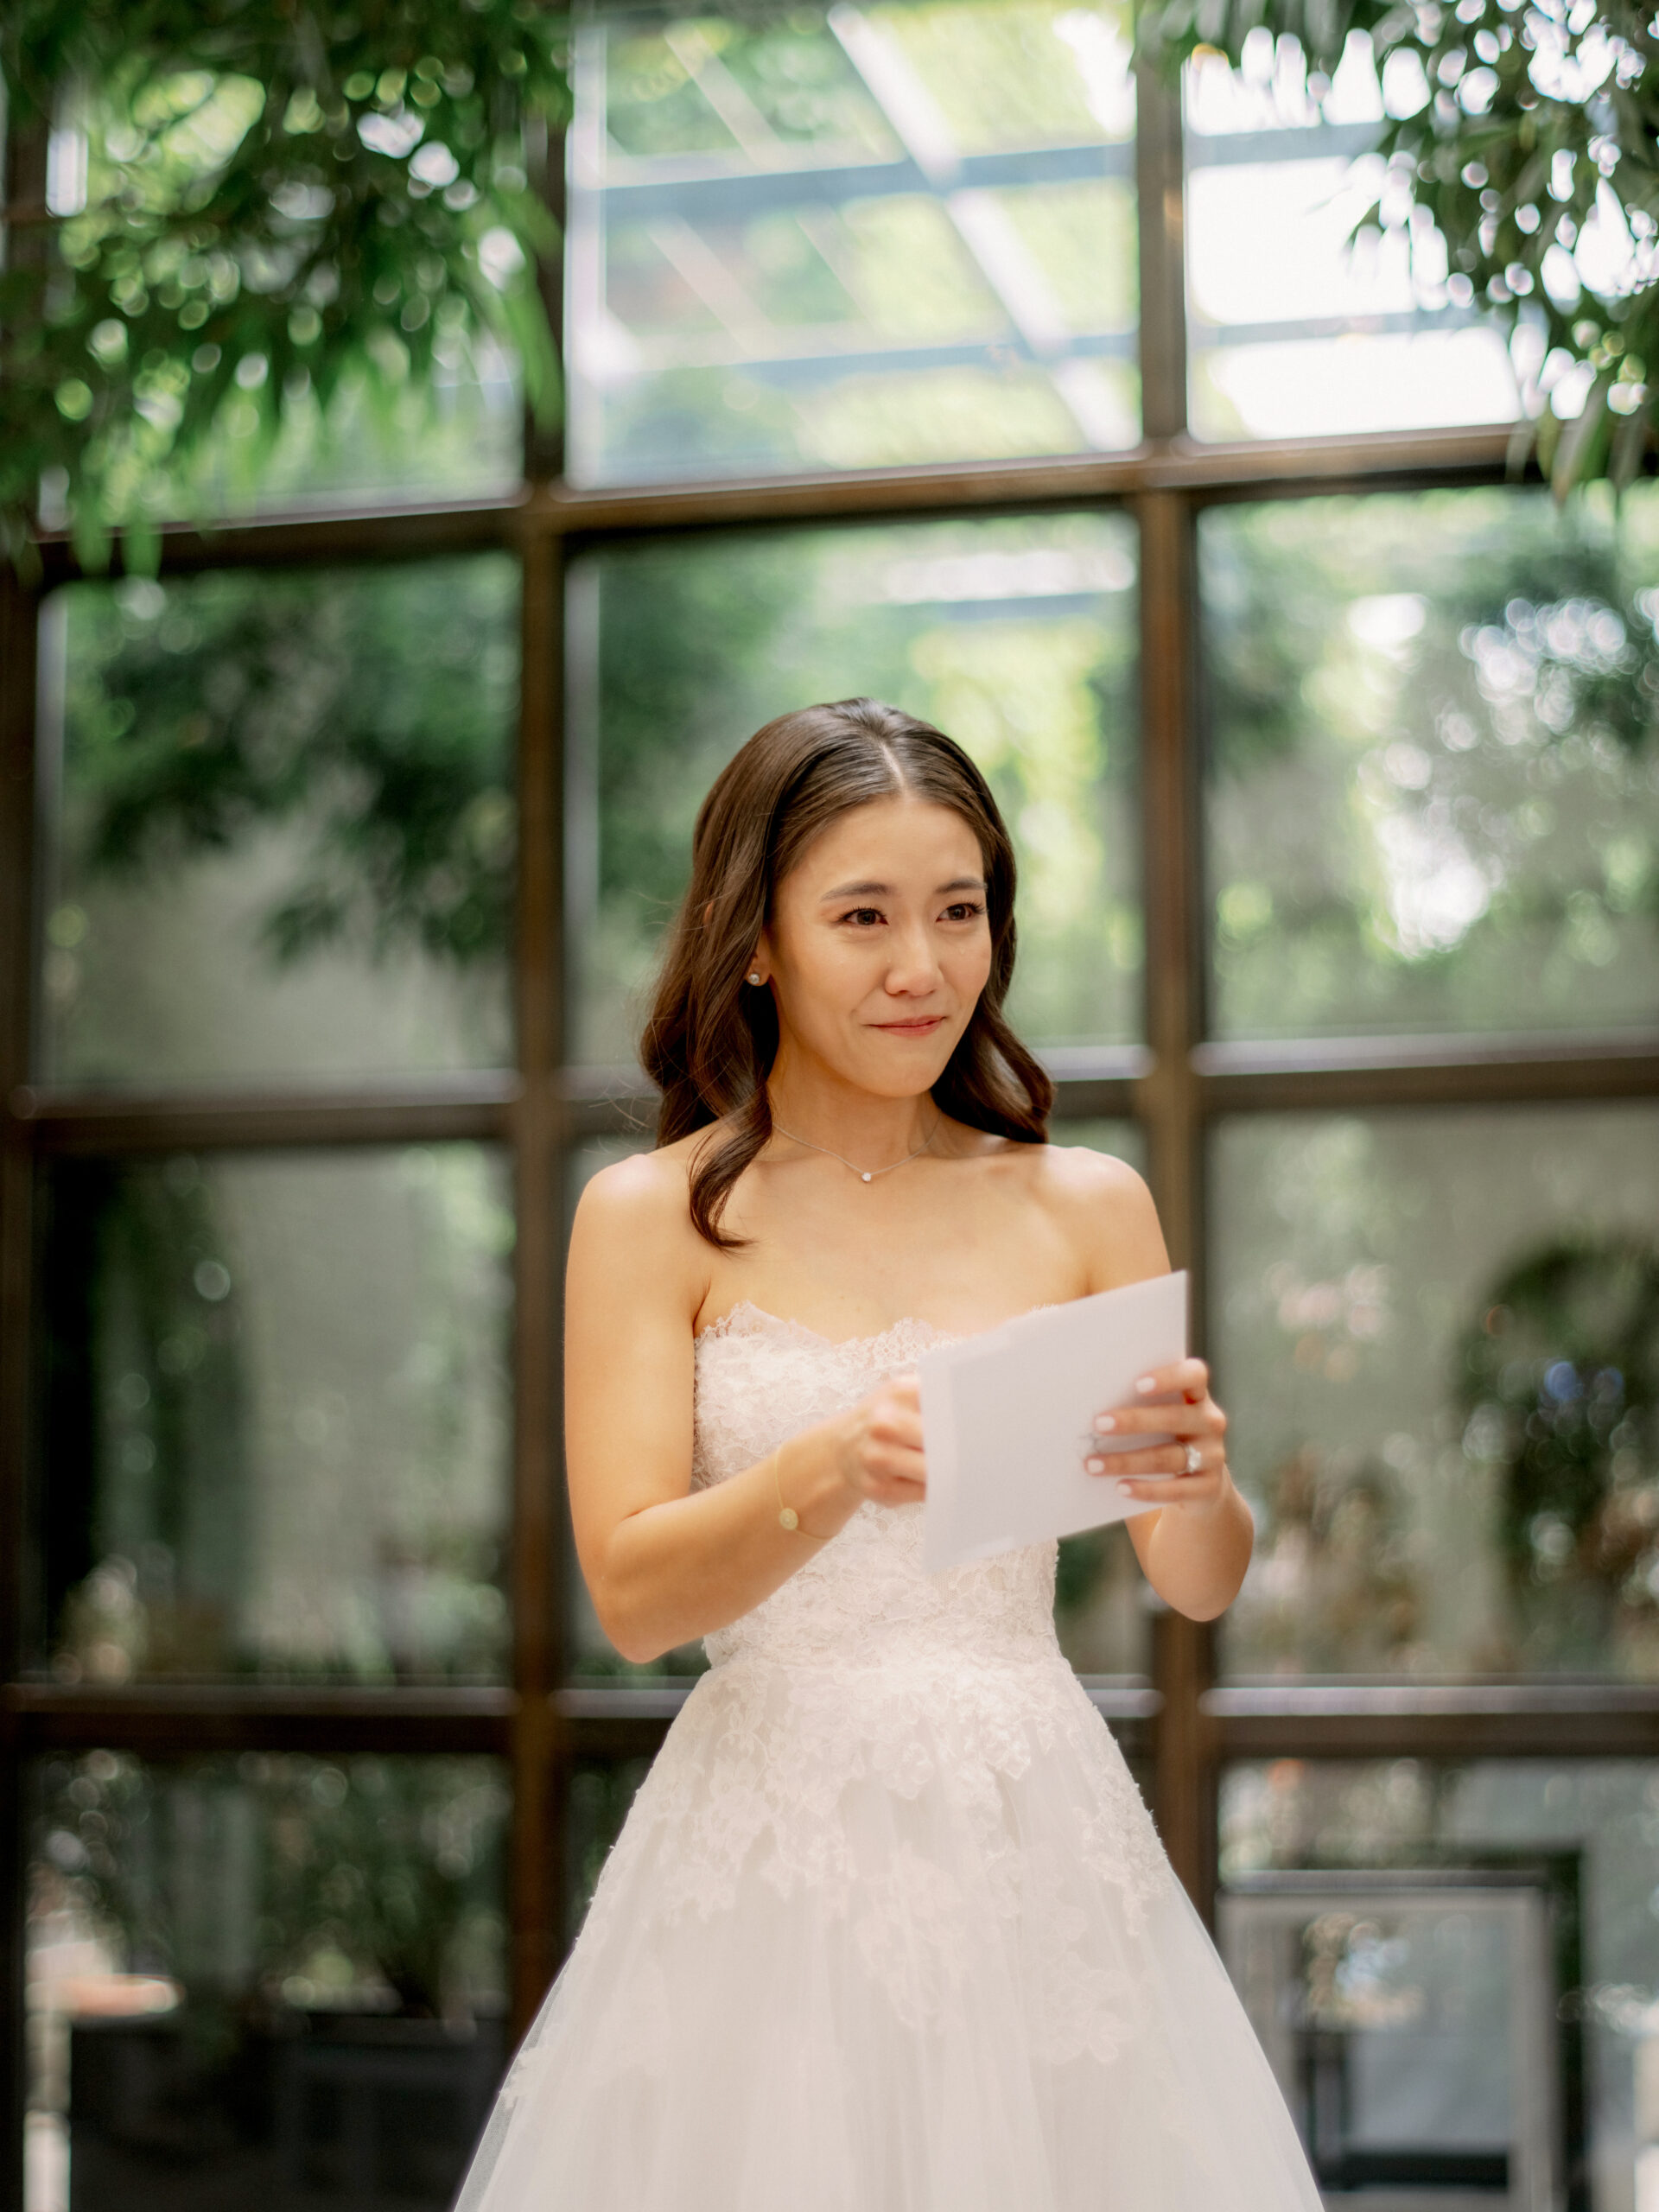 The bride is emotional in reading the letter from the groom. Candid moments photo by Jenny Fu Studio